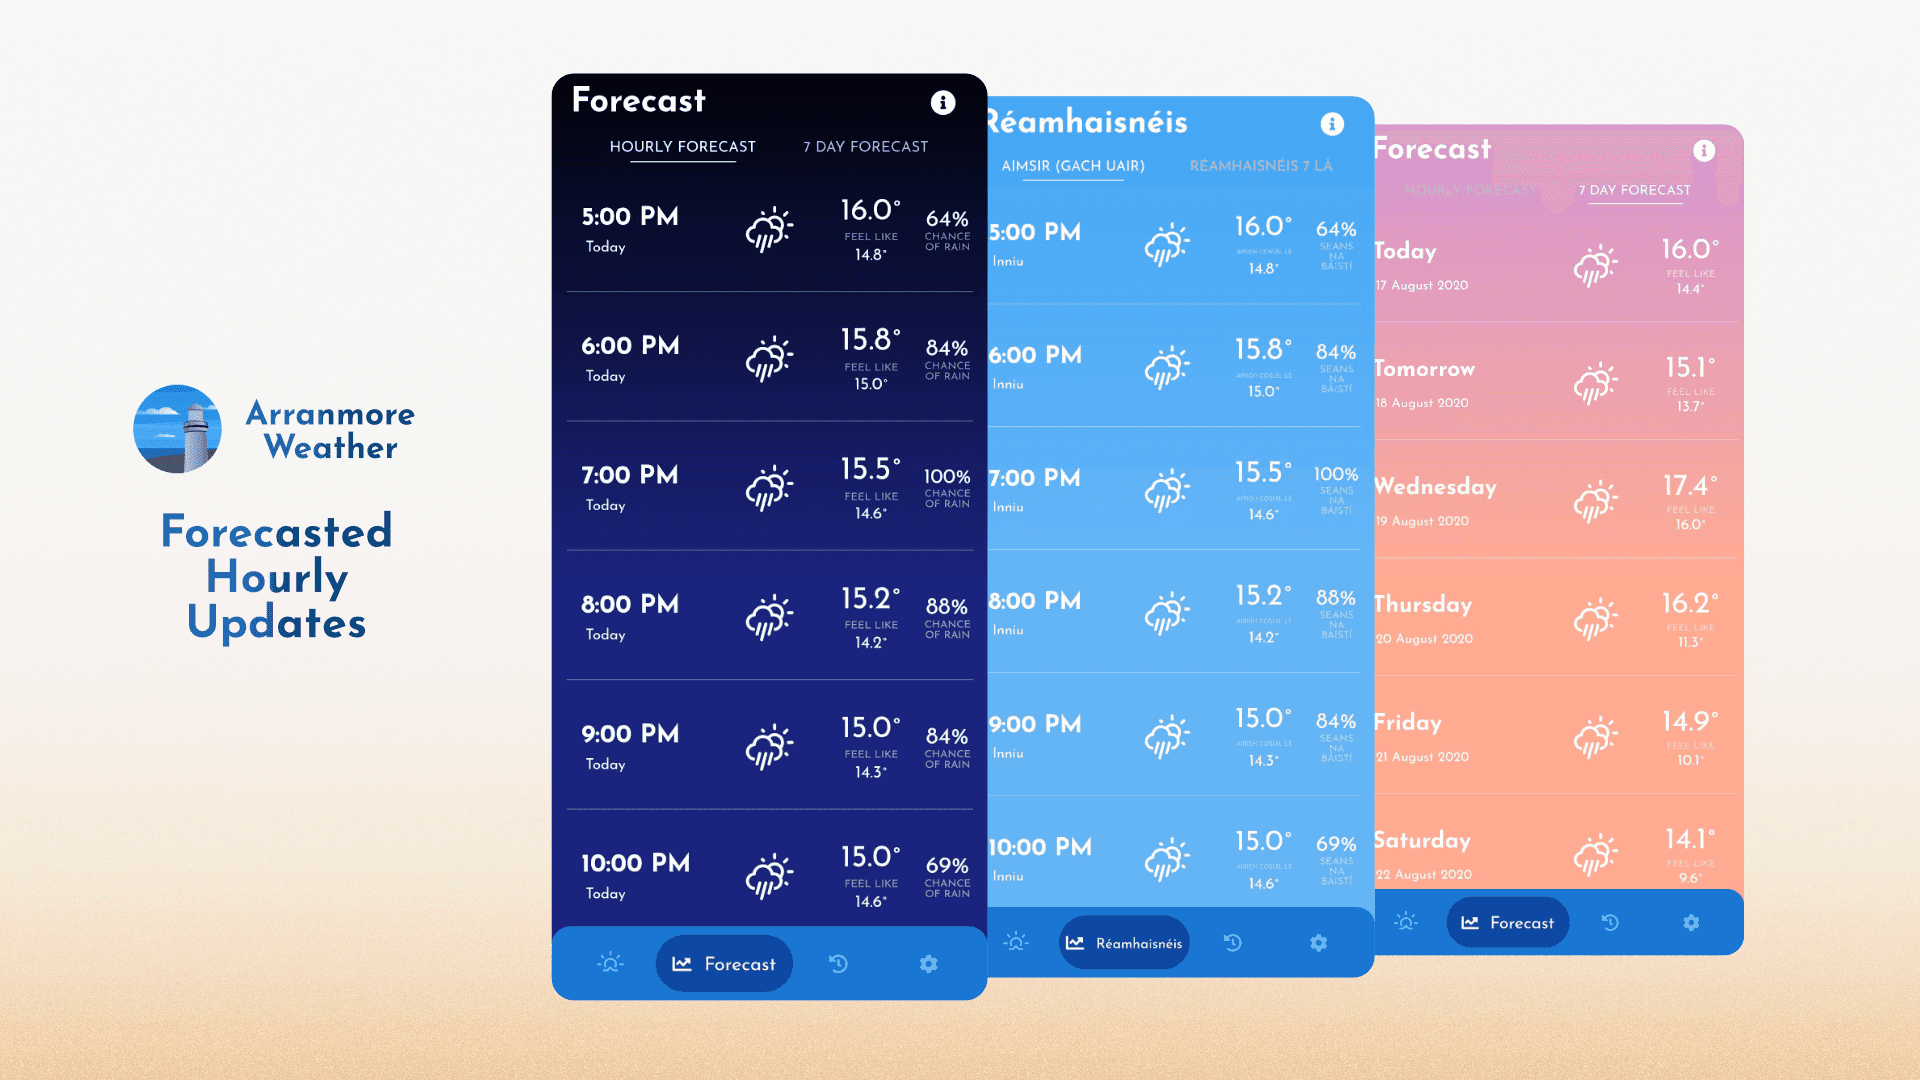 The updated forecast page